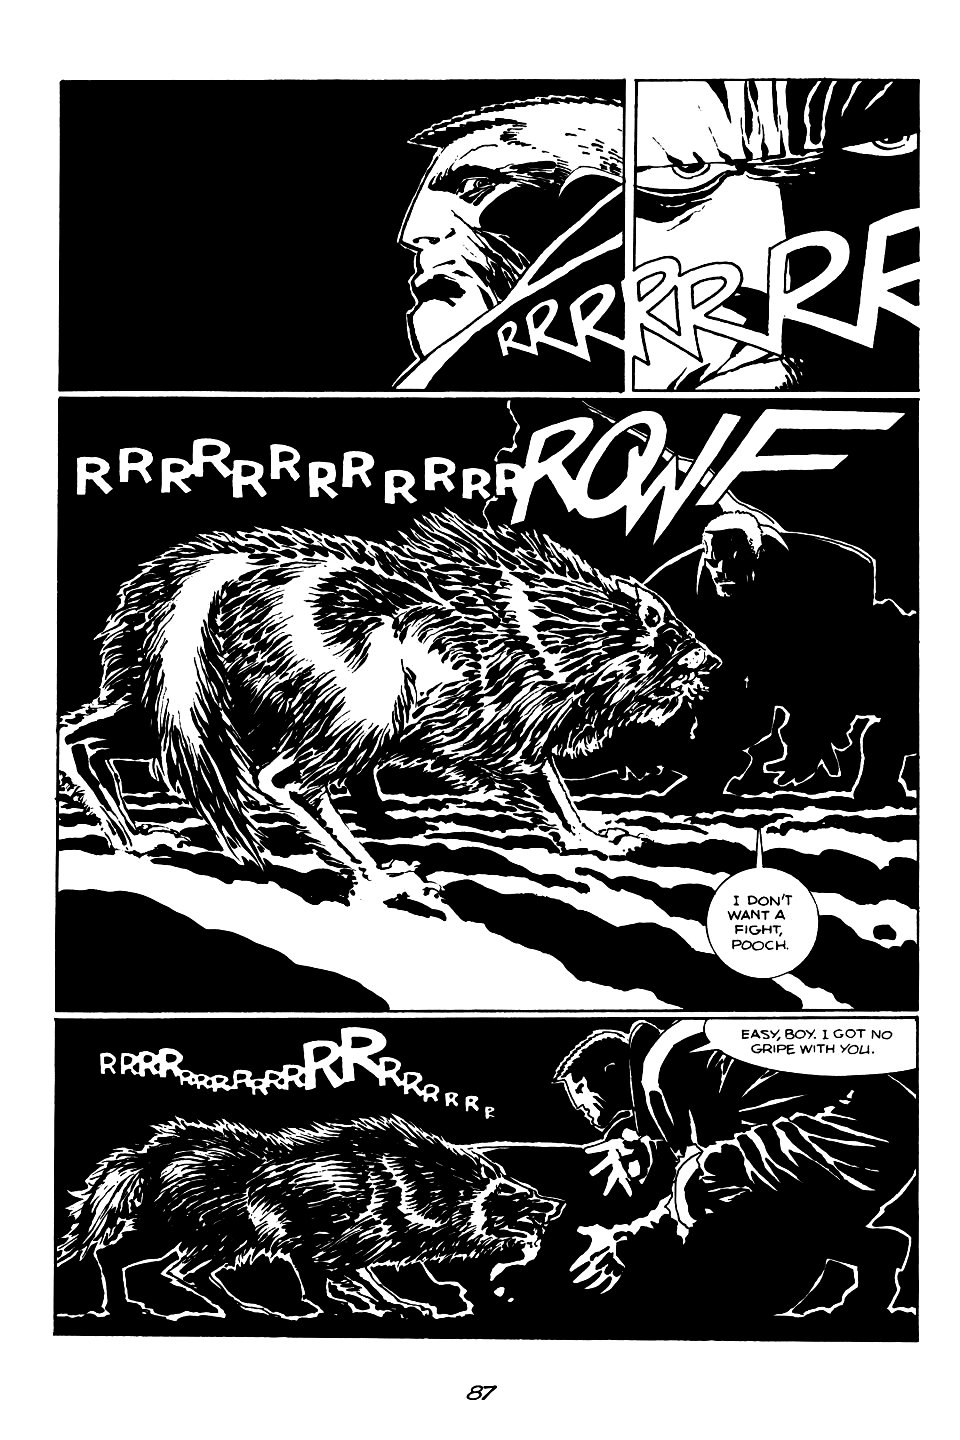 page 87 of sin city 1 the hard goodbye